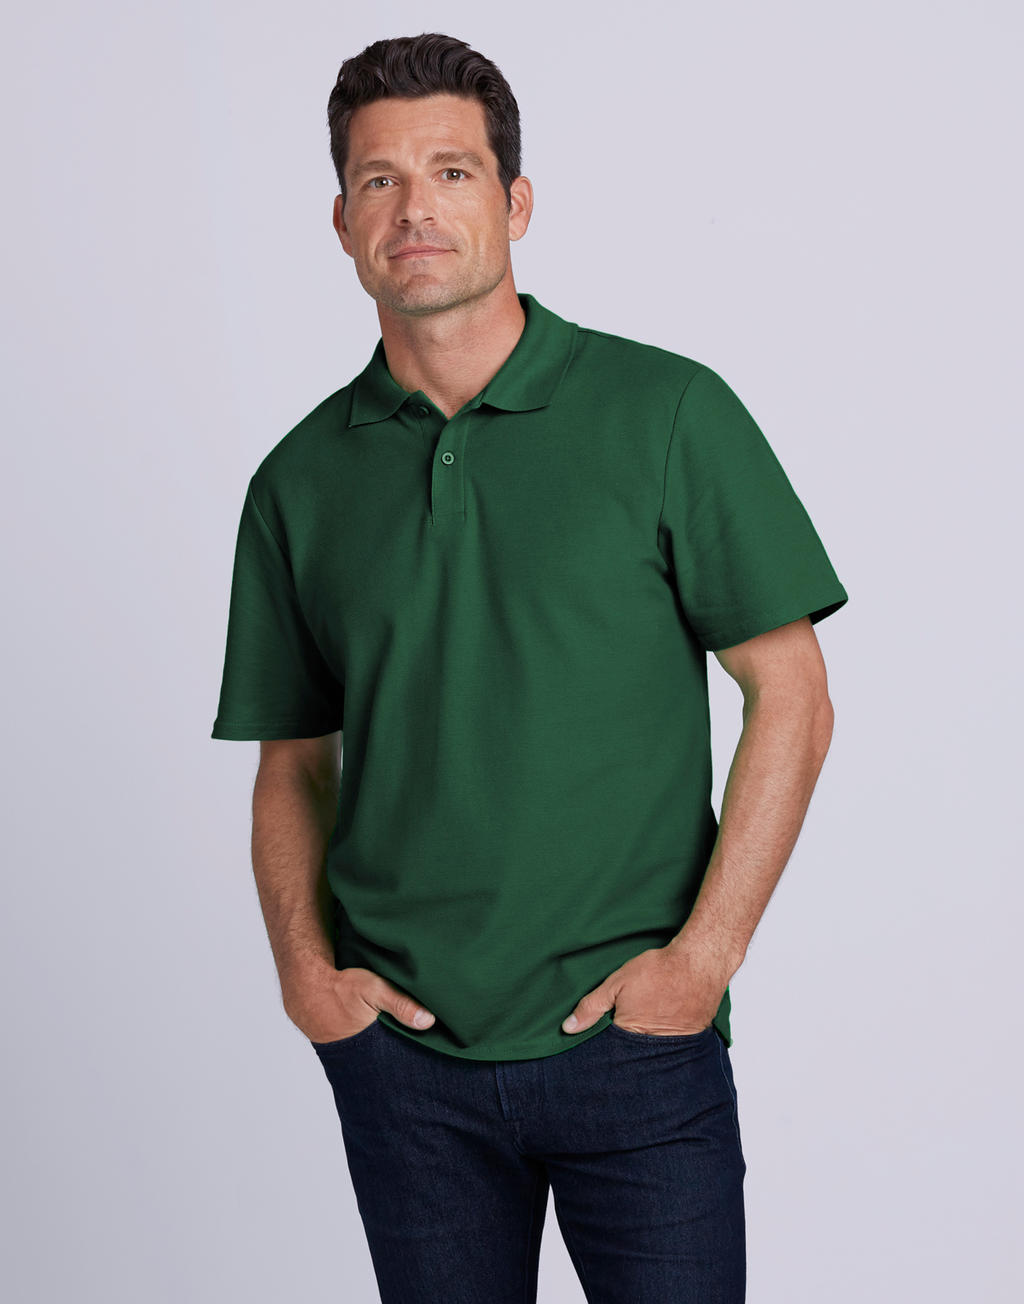 Softstyle® Adult Double Pique Polo